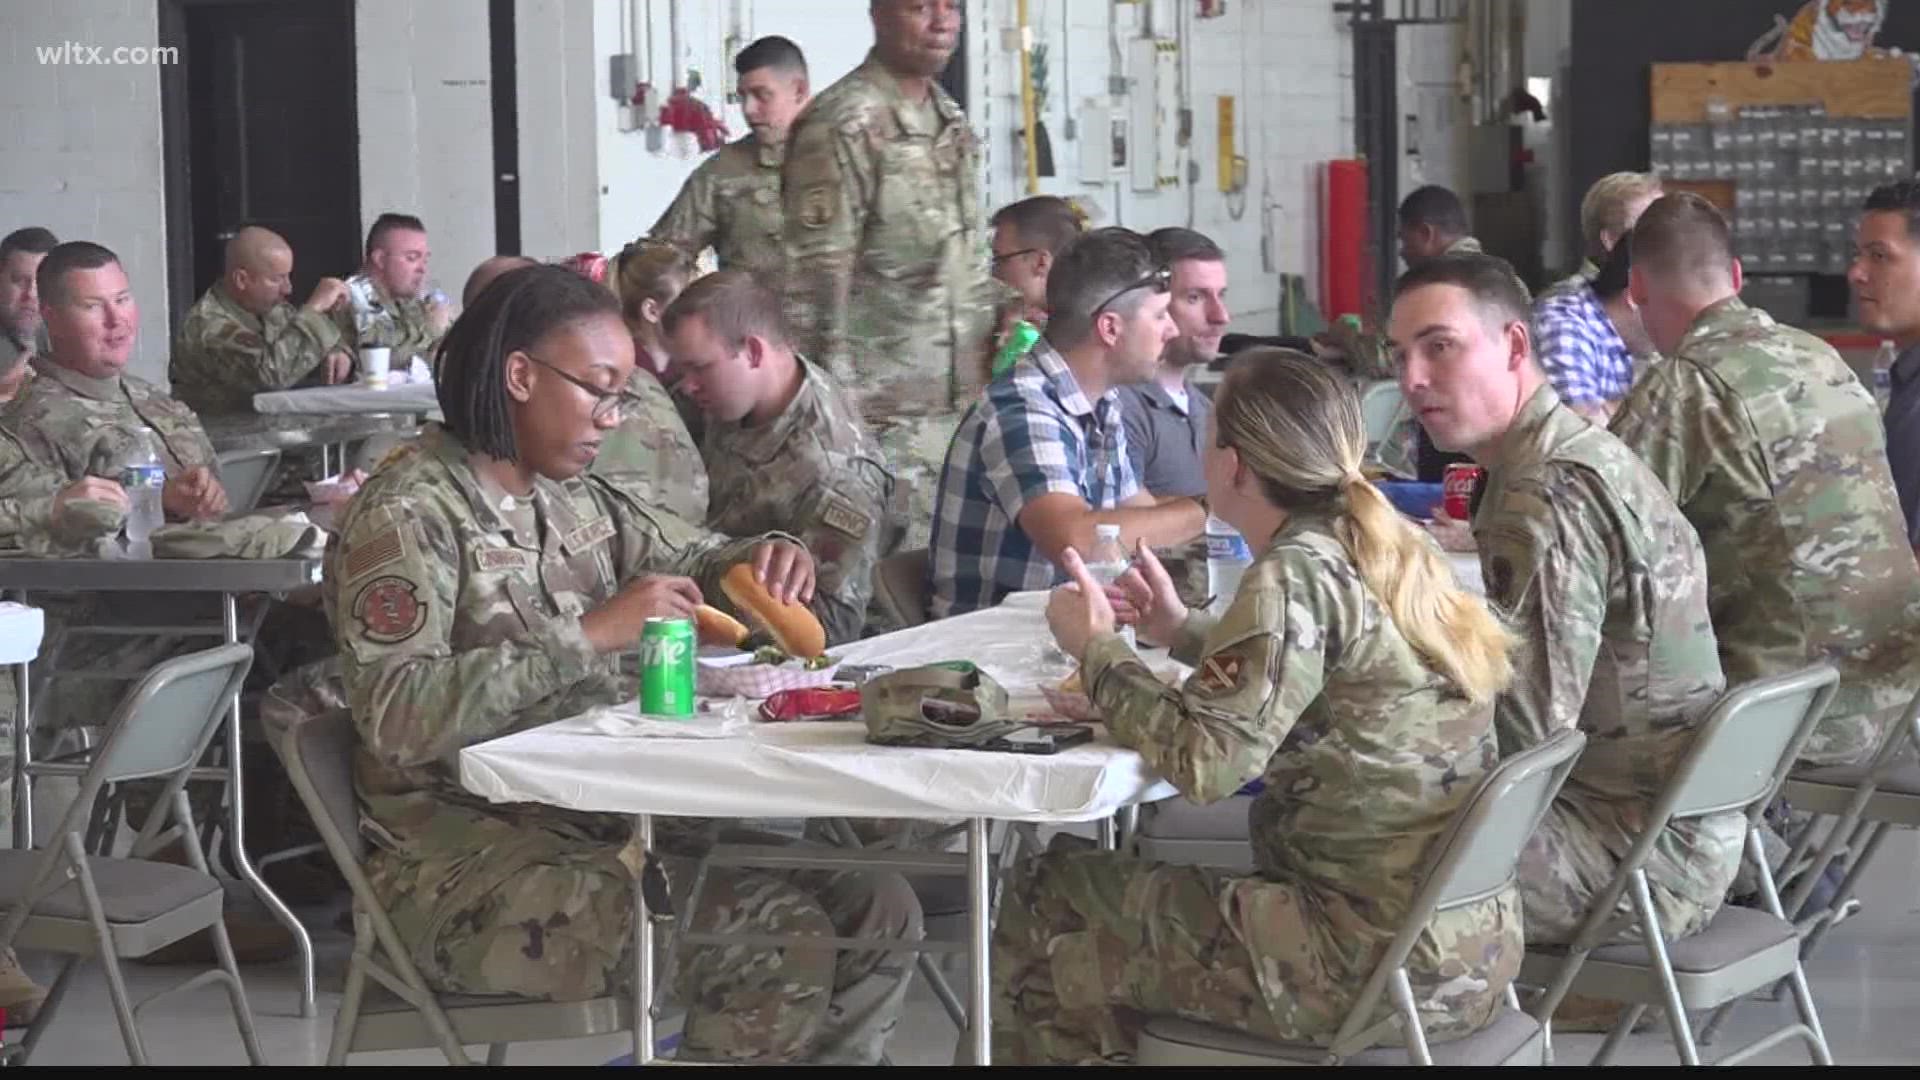 The Military Appreciation Picnic was back in action at Shaw Air Force Base on Friday for the first time since 2019.